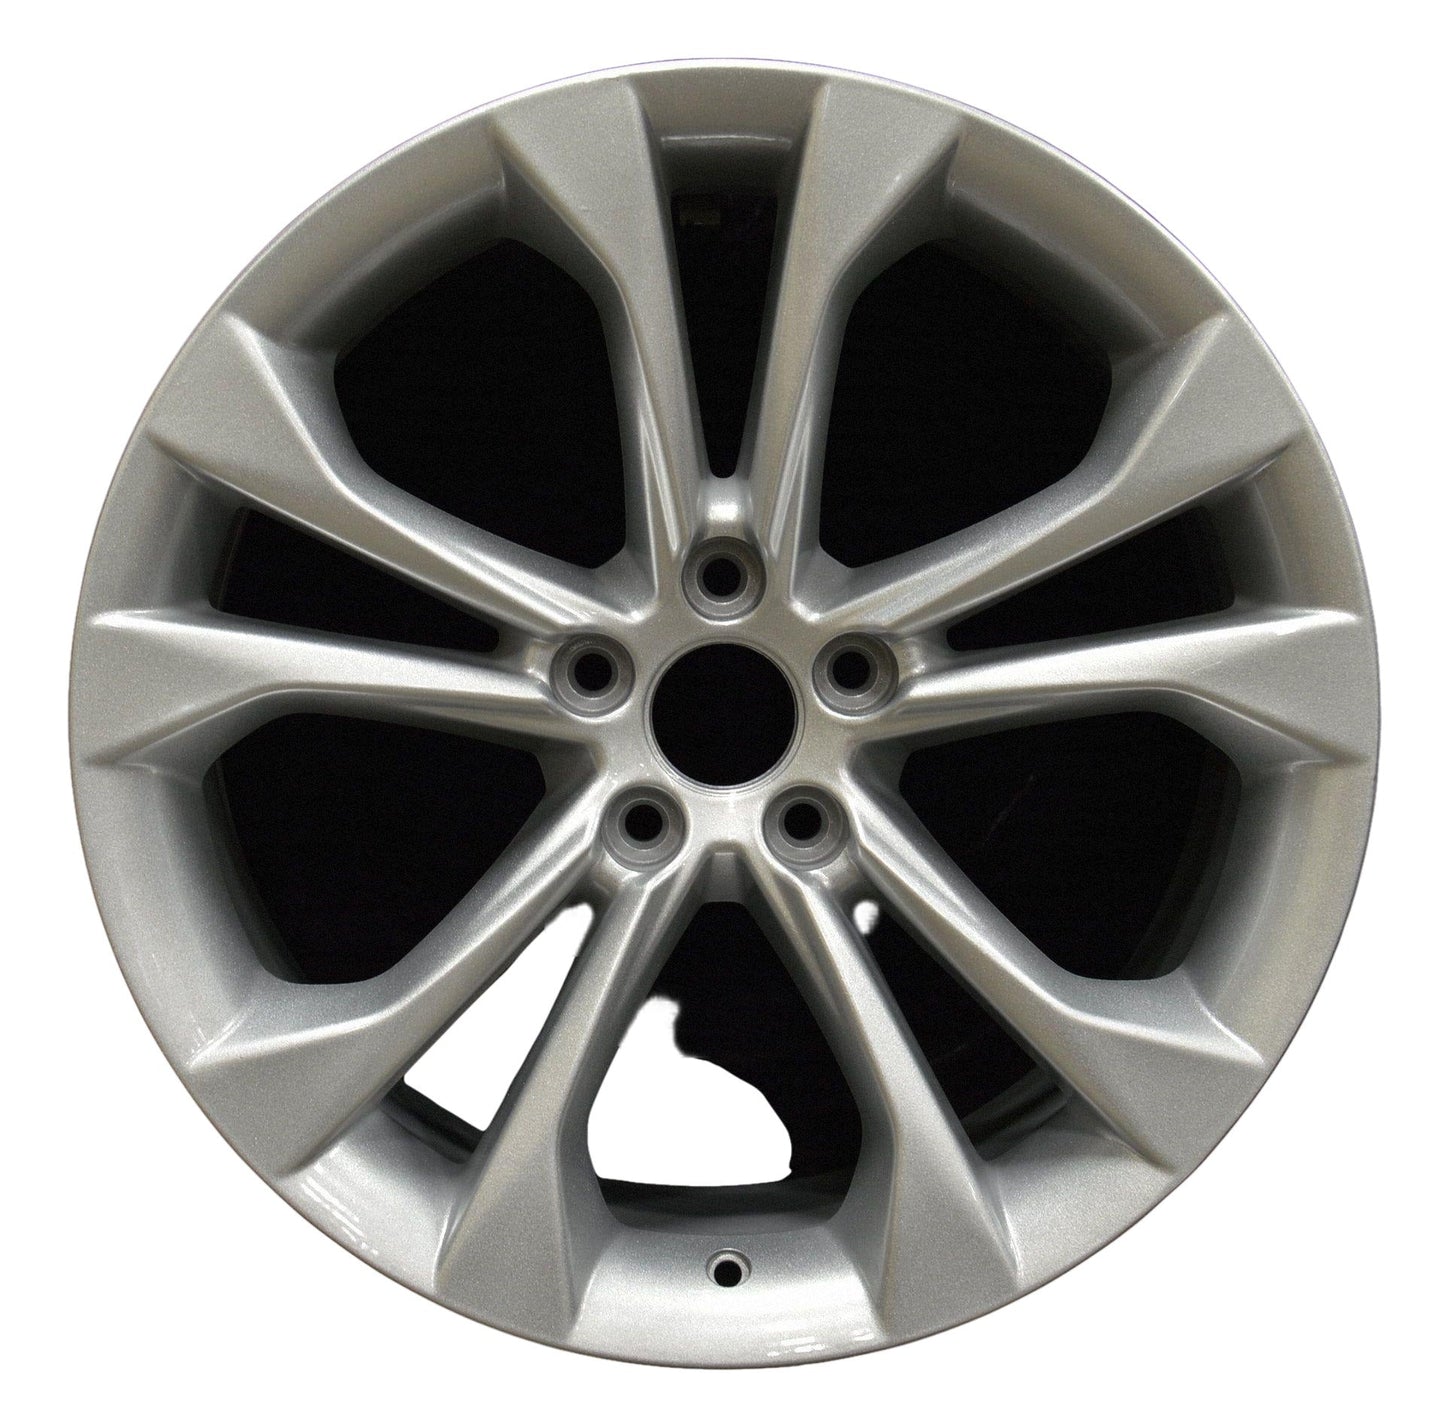 Ford Taurus  2012, 2013, 2014 Factory OEM Car Wheel Size 19x8.5 Alloy WAO.3924.PS08.FF